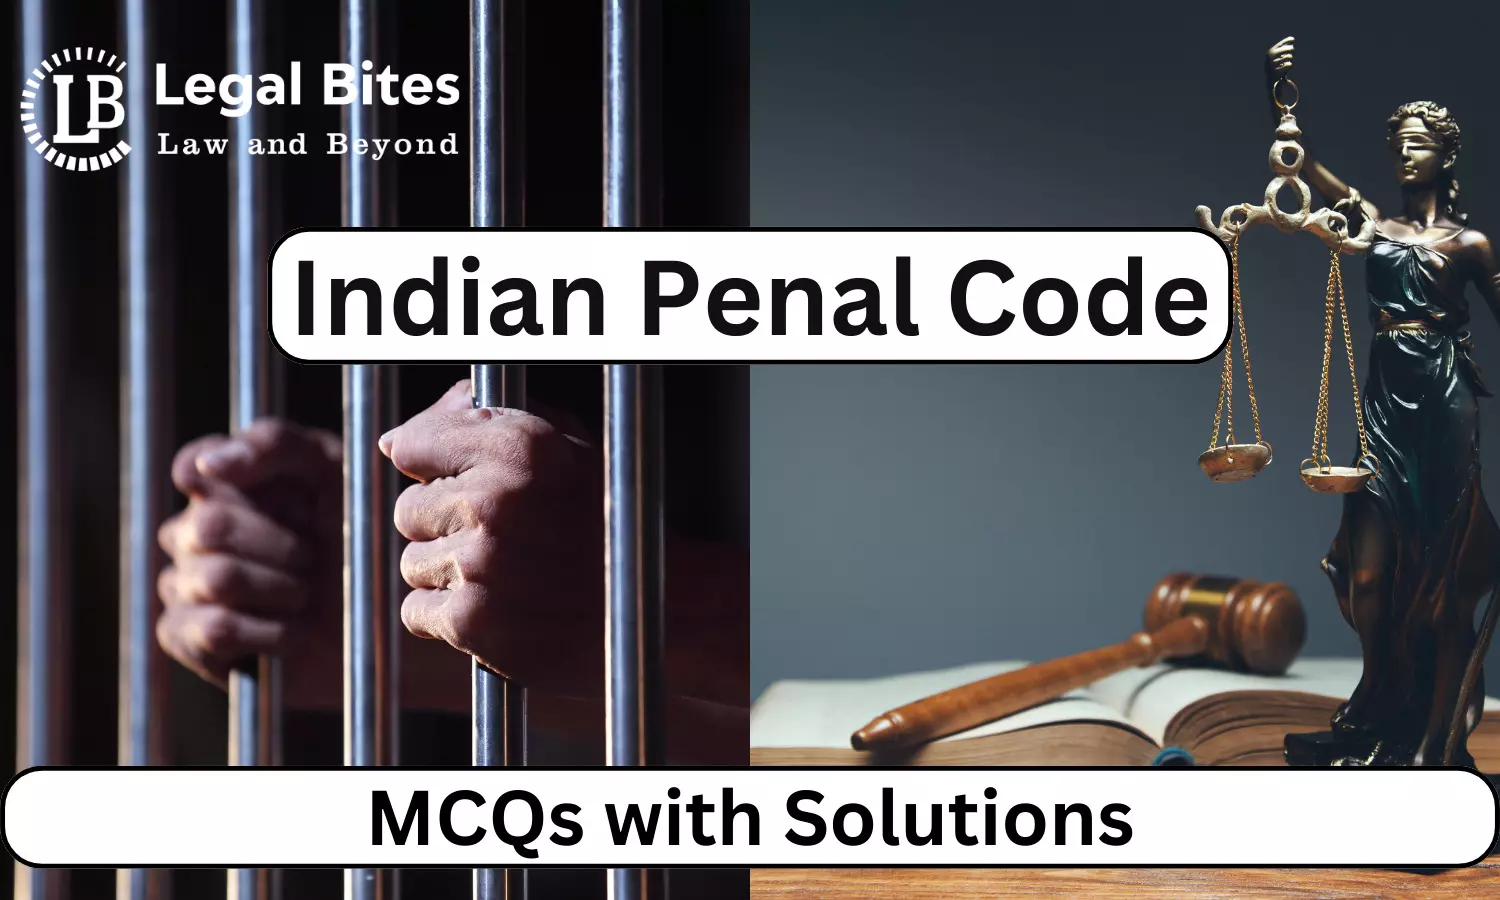 Indian Penal Code (IPC) MCQs for Law Aspirants: Solved High-Quality MCQs for Judiciary Prelims